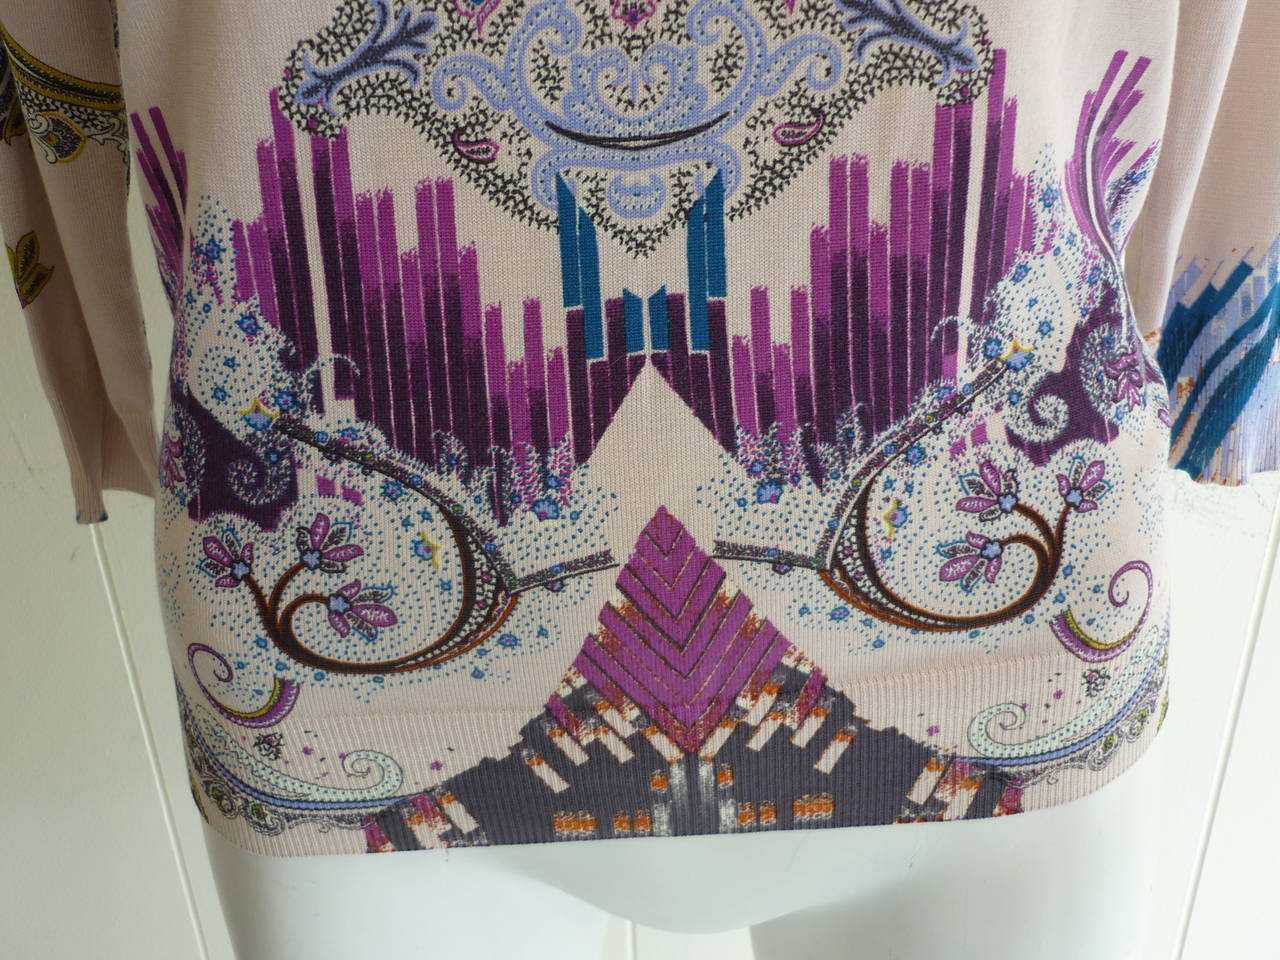 Great addition to your wardrobe, this top is made of 85% silk and 15% elastan which give it movement. The graphics are a mix of the ETRO paisley pattern as well as a new age look.